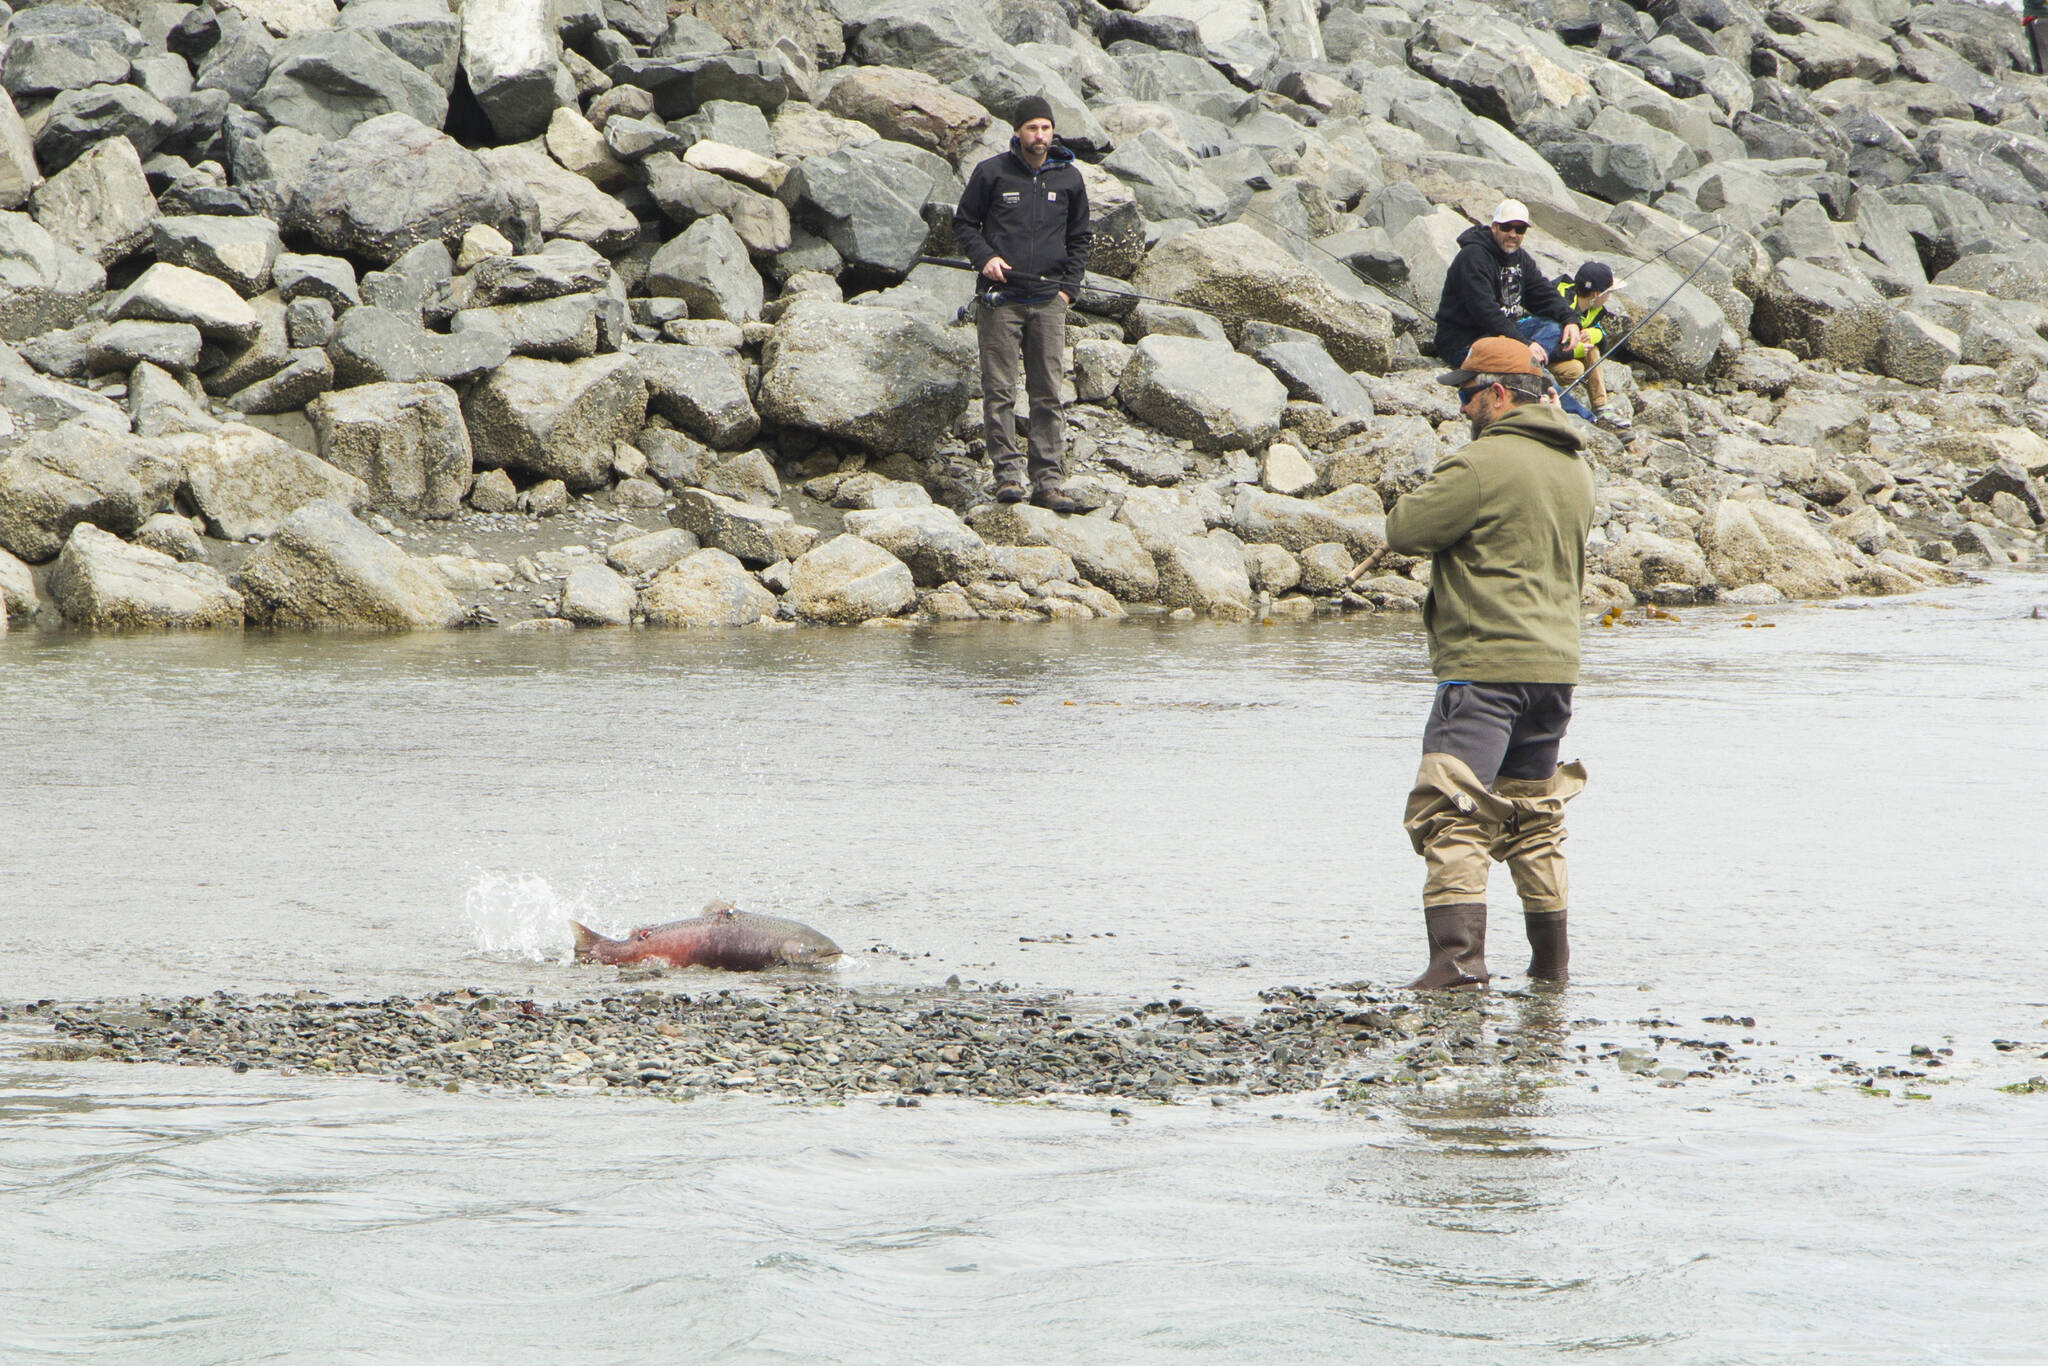 A fisherman catches a salmon in the Nick Dudiak Fishing Lagoon before the tide washed in on June 25, 2021, in Homer, Alaska. (Photo by Sarah Knapp/Homer News)